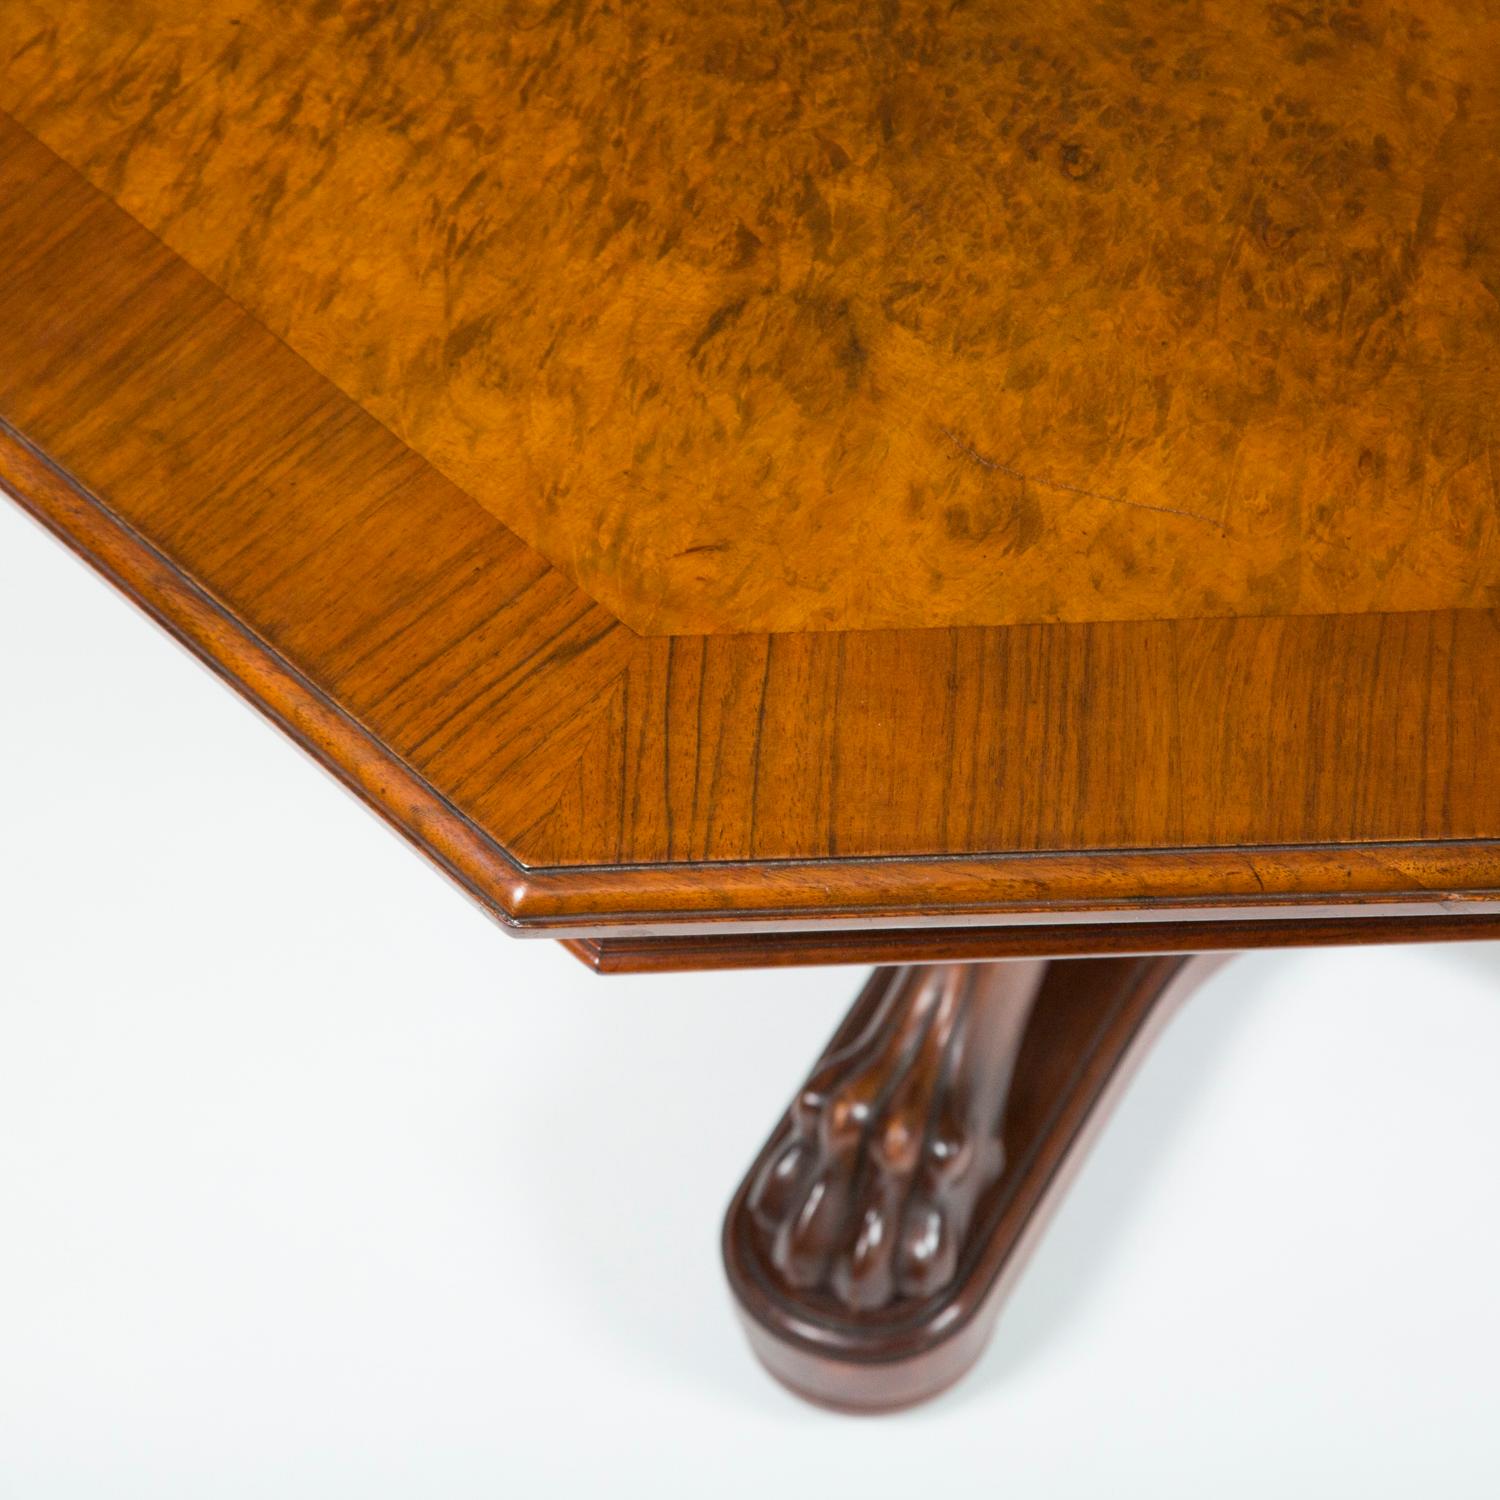 Walnut Octagonal Center Table, Danish, circa 1880 In Good Condition For Sale In London, GB